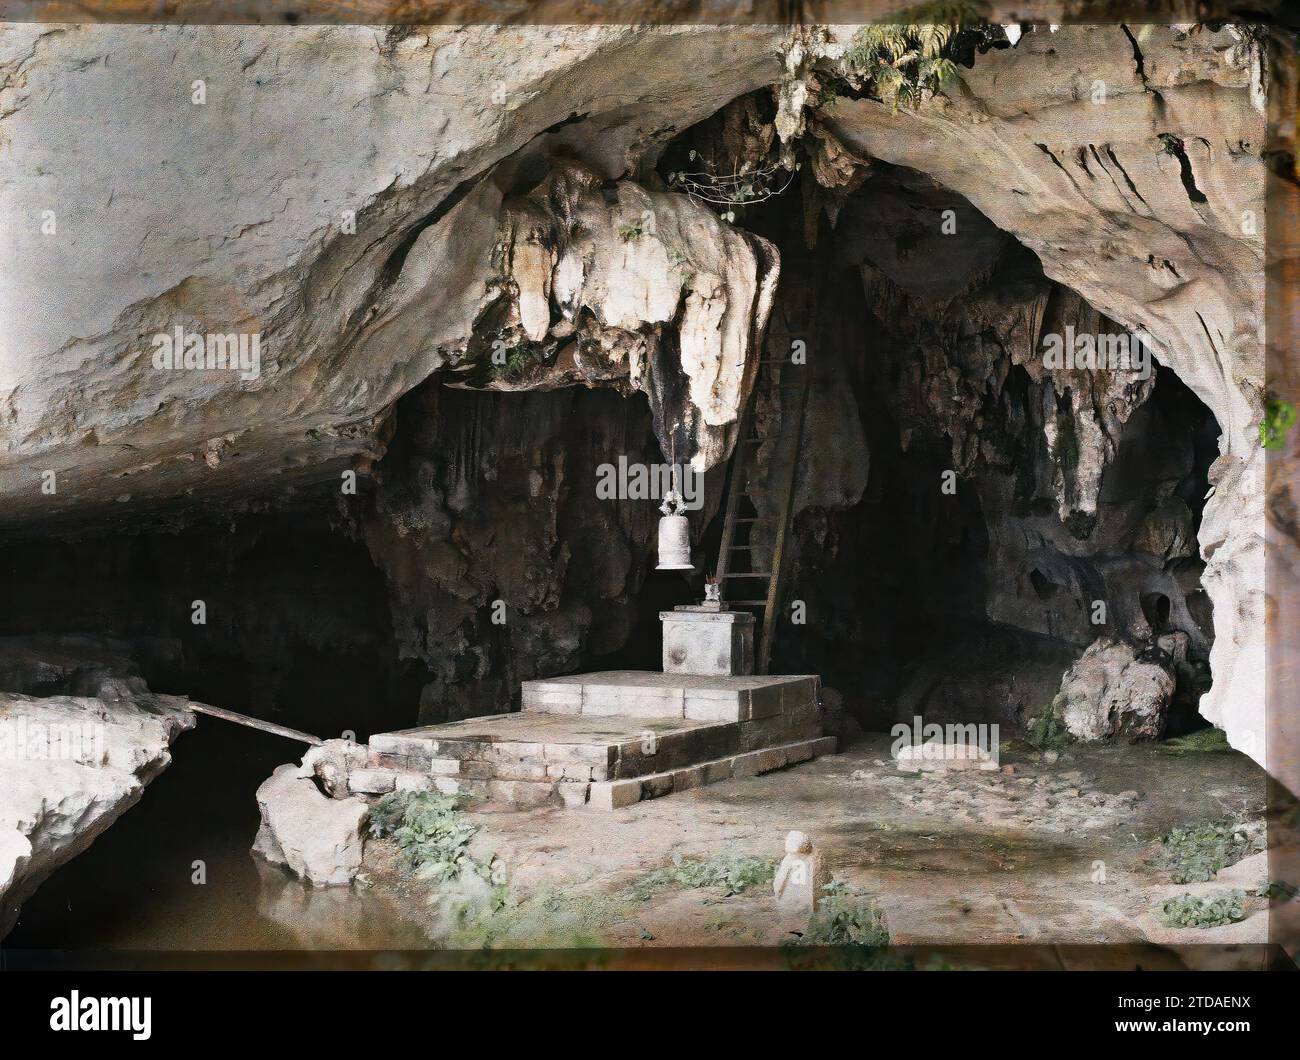 Ky-lu' a, province of Lang-so' n, Tonkin, Indochina The entrance to the small cave of the Rocks of Ky-lu' a, Religion, Art, Sciences, Techniques, Buddhism, Music, Temple, Erosion, Plan water, Altar, Cave, Geology, Indochina, Tonkin, Ky-lua, From Hanoi to the China Gate, The Ky-lua caves, Entrance to the small cave, Ky-Lua, 01/09/1915 - 31/10/1915, Busy, Léon, Léon Busy photographer en Indochine, Autochrome, photo, Glass, Autochrome, photo, Positive, Horizontal, Size 9 x 12 cm Stock Photo